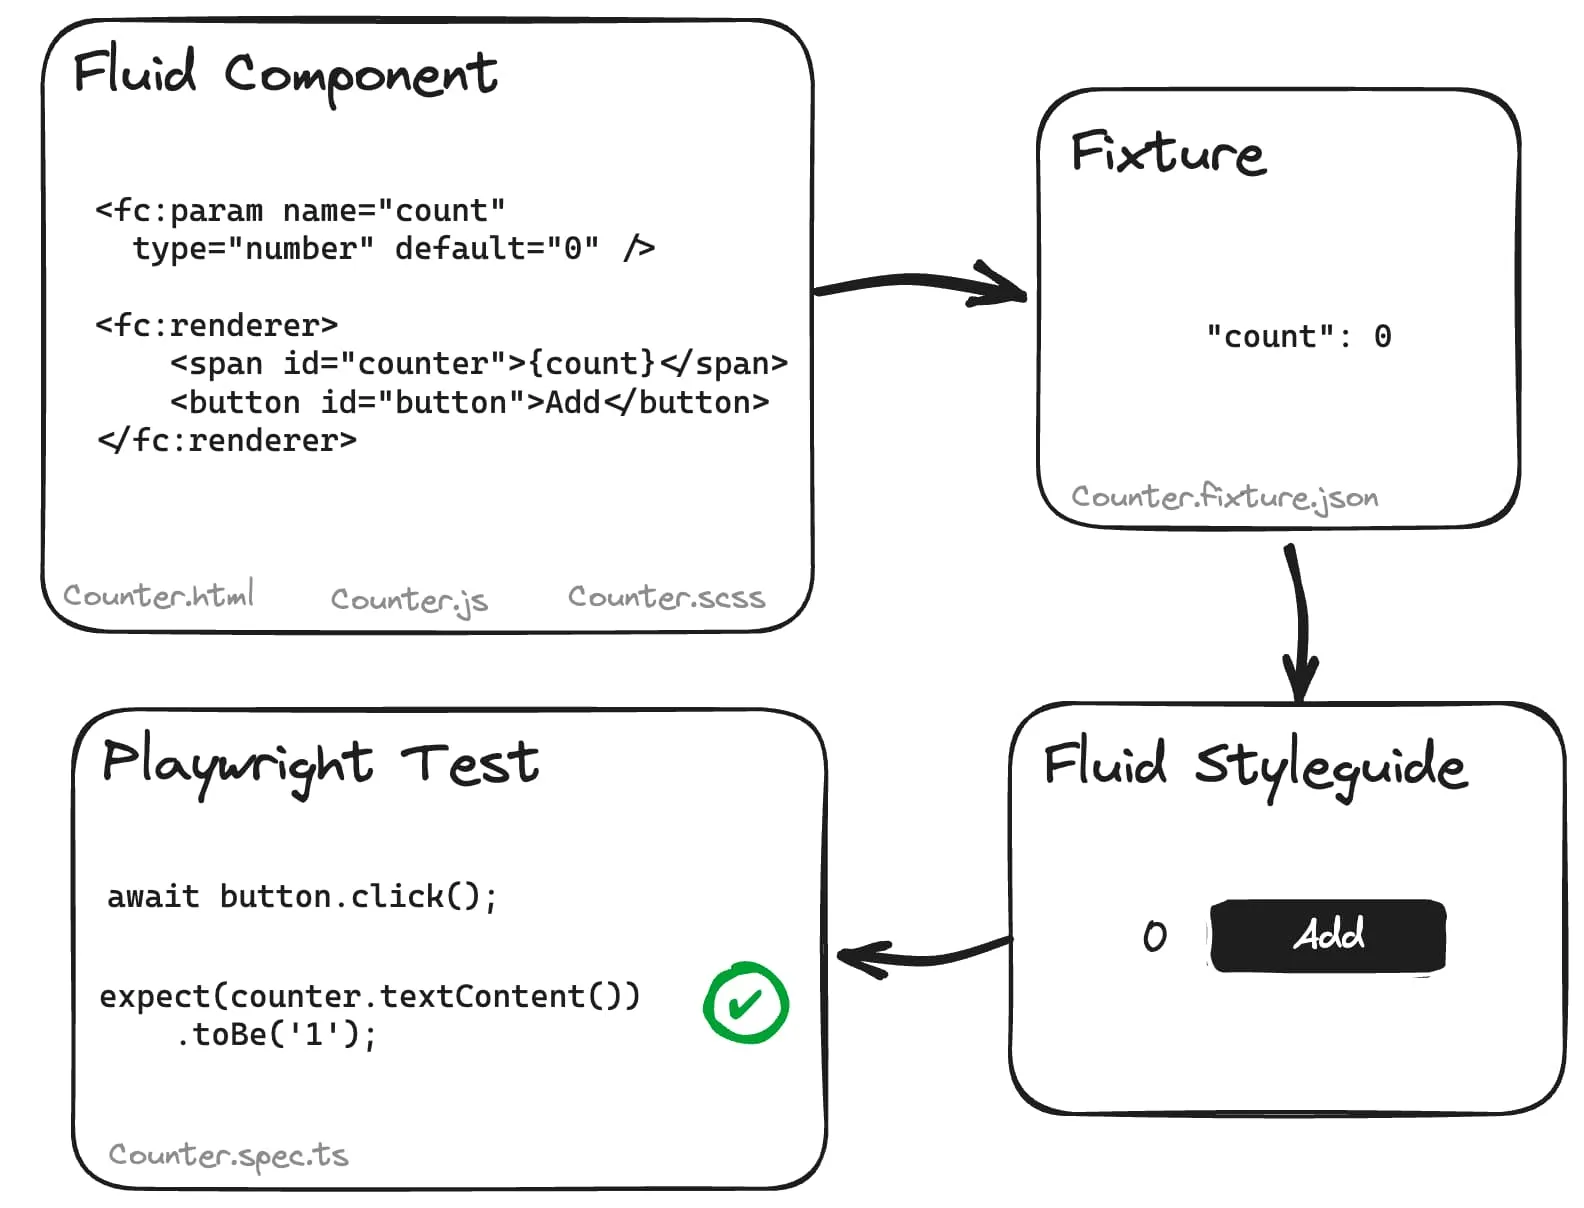 Flowchart illustrating how a counter Fluid component is populated with JSON fixture data and displayed in the Fluid Styleguide. A corresponding Playwright test clicks on the button and expects the counter to be incremented by one.